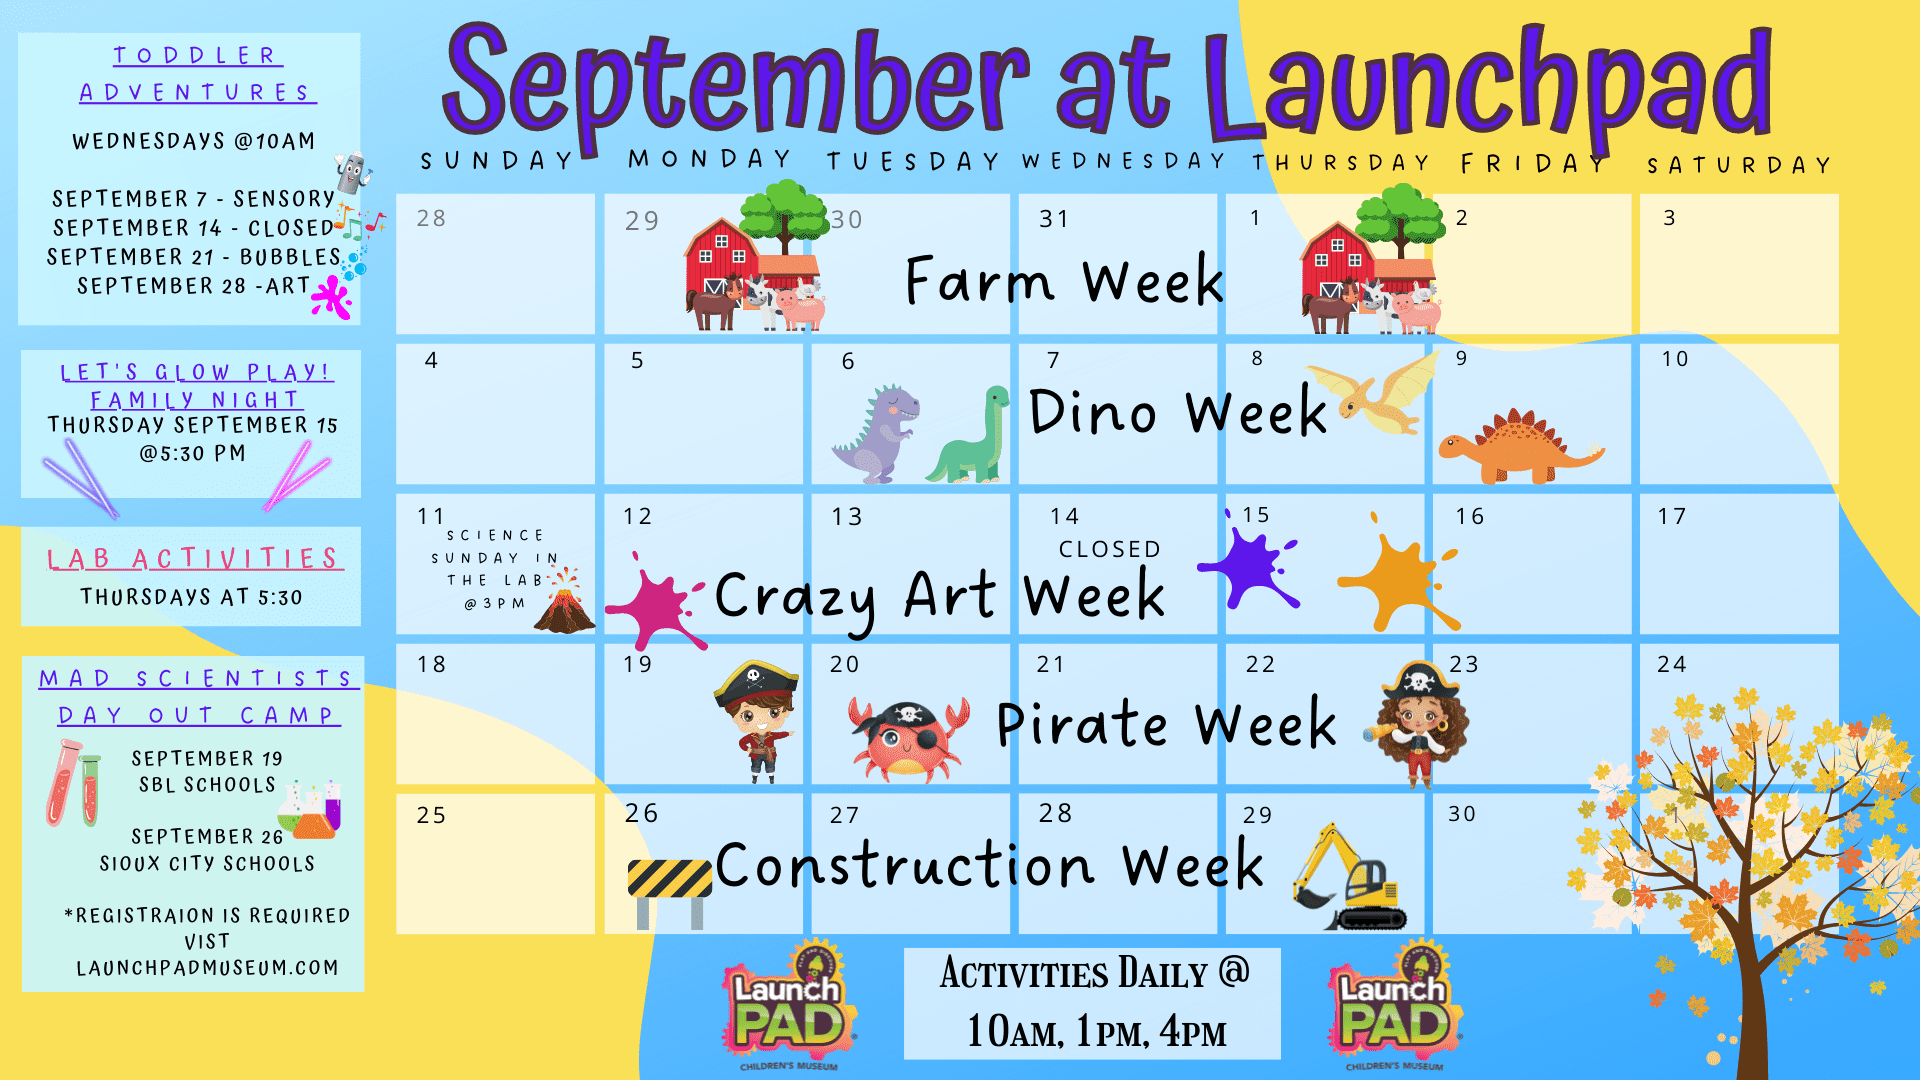 September at launchpad